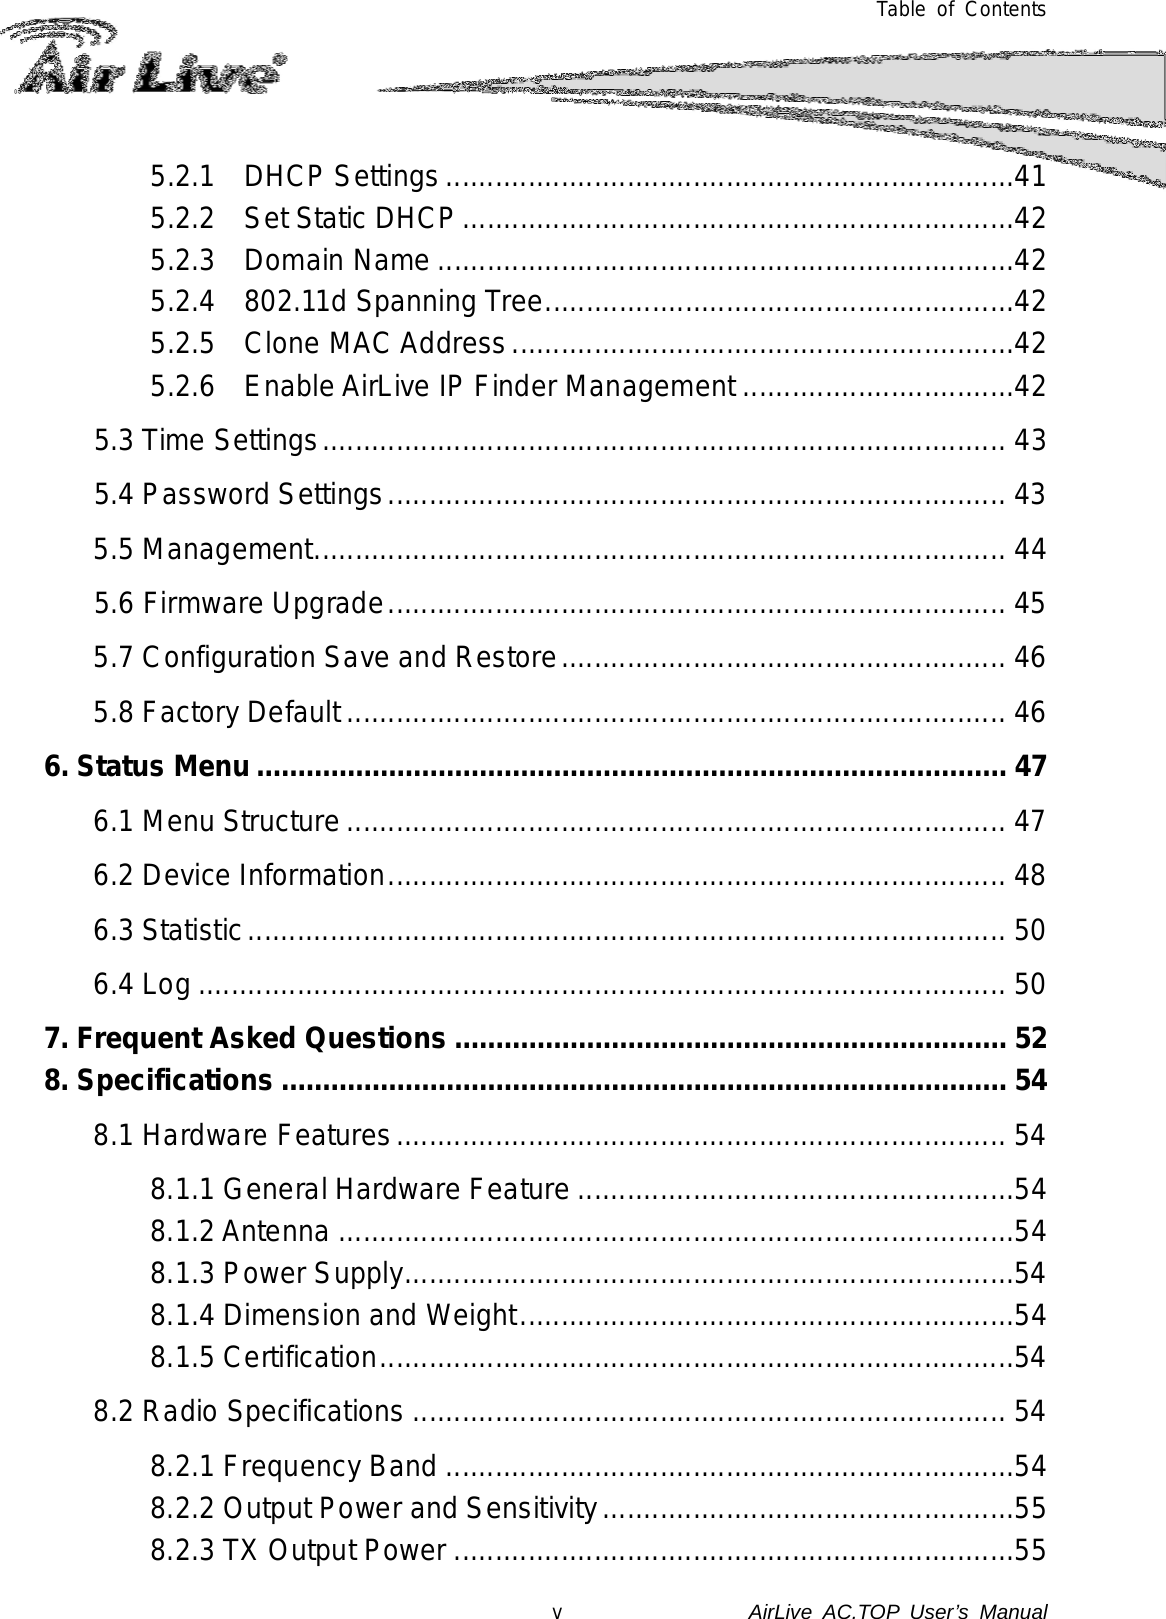  Table of Contents 5.2.1 DHCP Settings .....................................................................41 5.2.2 Set Static DHCP ...................................................................42 5.2.3 Domain Name ......................................................................42 5.2.4 802.11d Spanning Tree .........................................................42 5.2.5  Clone MAC Address .............................................................42 5.2.6 Enable AirLive IP Finder Management .................................42 5.3 Time Settings ................................................................................... 43 5.4 Password Settings ........................................................................... 43 5.5 Management .................................................................................... 44 5.6 Firmware Upgrade ........................................................................... 45 5.7 Configuration Save and Restore ...................................................... 46 5.8 Factory Default ................................................................................ 46 6. Status Menu ........................................................................................... 47 6.1 Menu Structure ................................................................................ 47 6.2 Device Information ........................................................................... 48 6.3 Statistic ............................................................................................ 50 6.4 Log .................................................................................................. 50 7. Frequent Asked Questions ................................................................... 52 8. Specifications ........................................................................................ 54 8.1 Hardware Features .......................................................................... 54 8.1.1 General Hardware Feature .....................................................54 8.1.2 Antenna ..................................................................................54 8.1.3 Power Supply ..........................................................................54 8.1.4 Dimension and Weight ............................................................54 8.1.5 Certification .............................................................................54 8.2 Radio Specifications ........................................................................ 54 8.2.1 Frequency Band .....................................................................54 8.2.2 Output Power and Sensitivity ..................................................55 8.2.3 TX Output Power ....................................................................55 v               AirLive  AC.TOP User’s Manual 